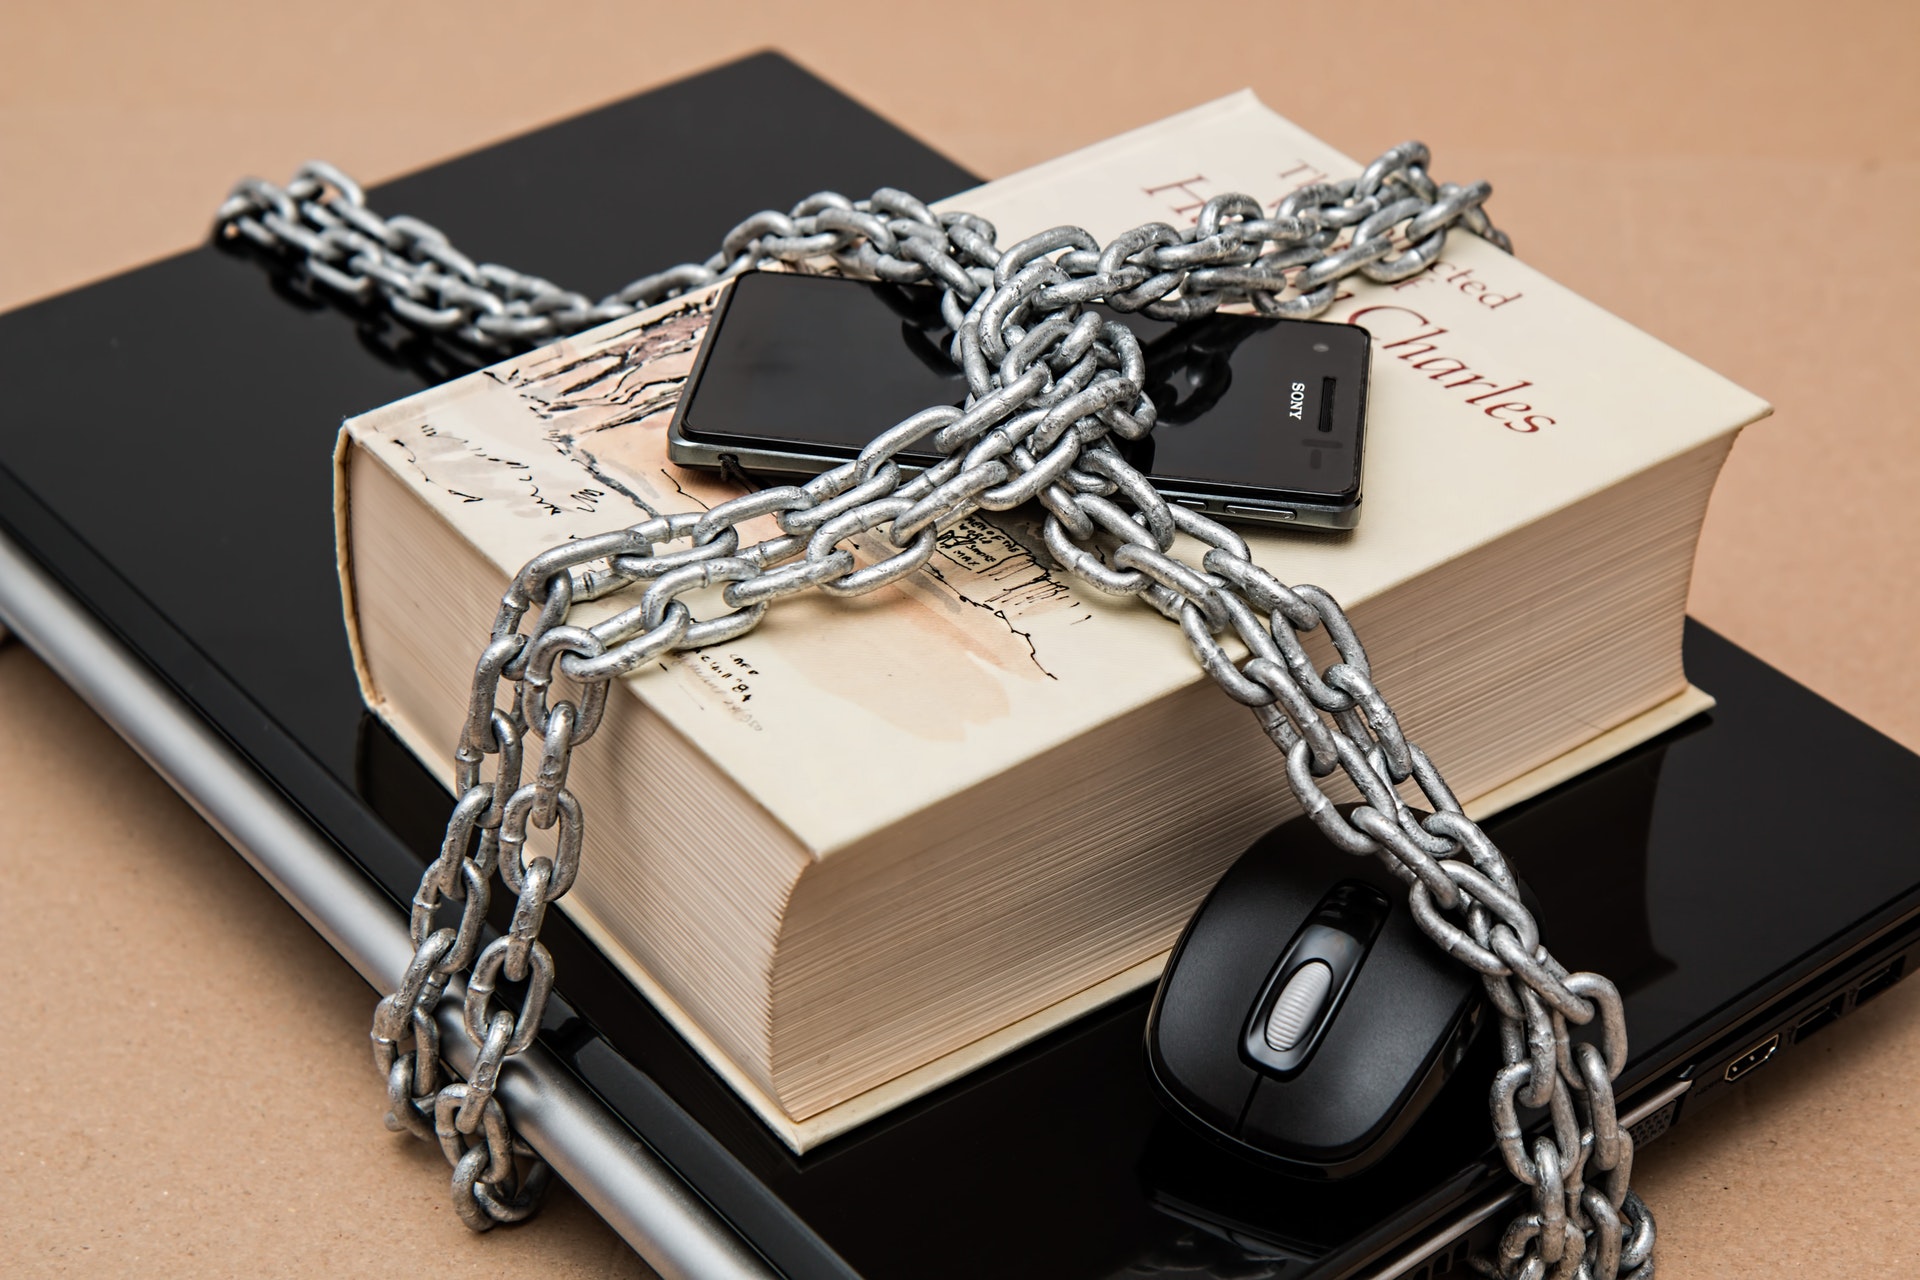 Digital devices and books chained together